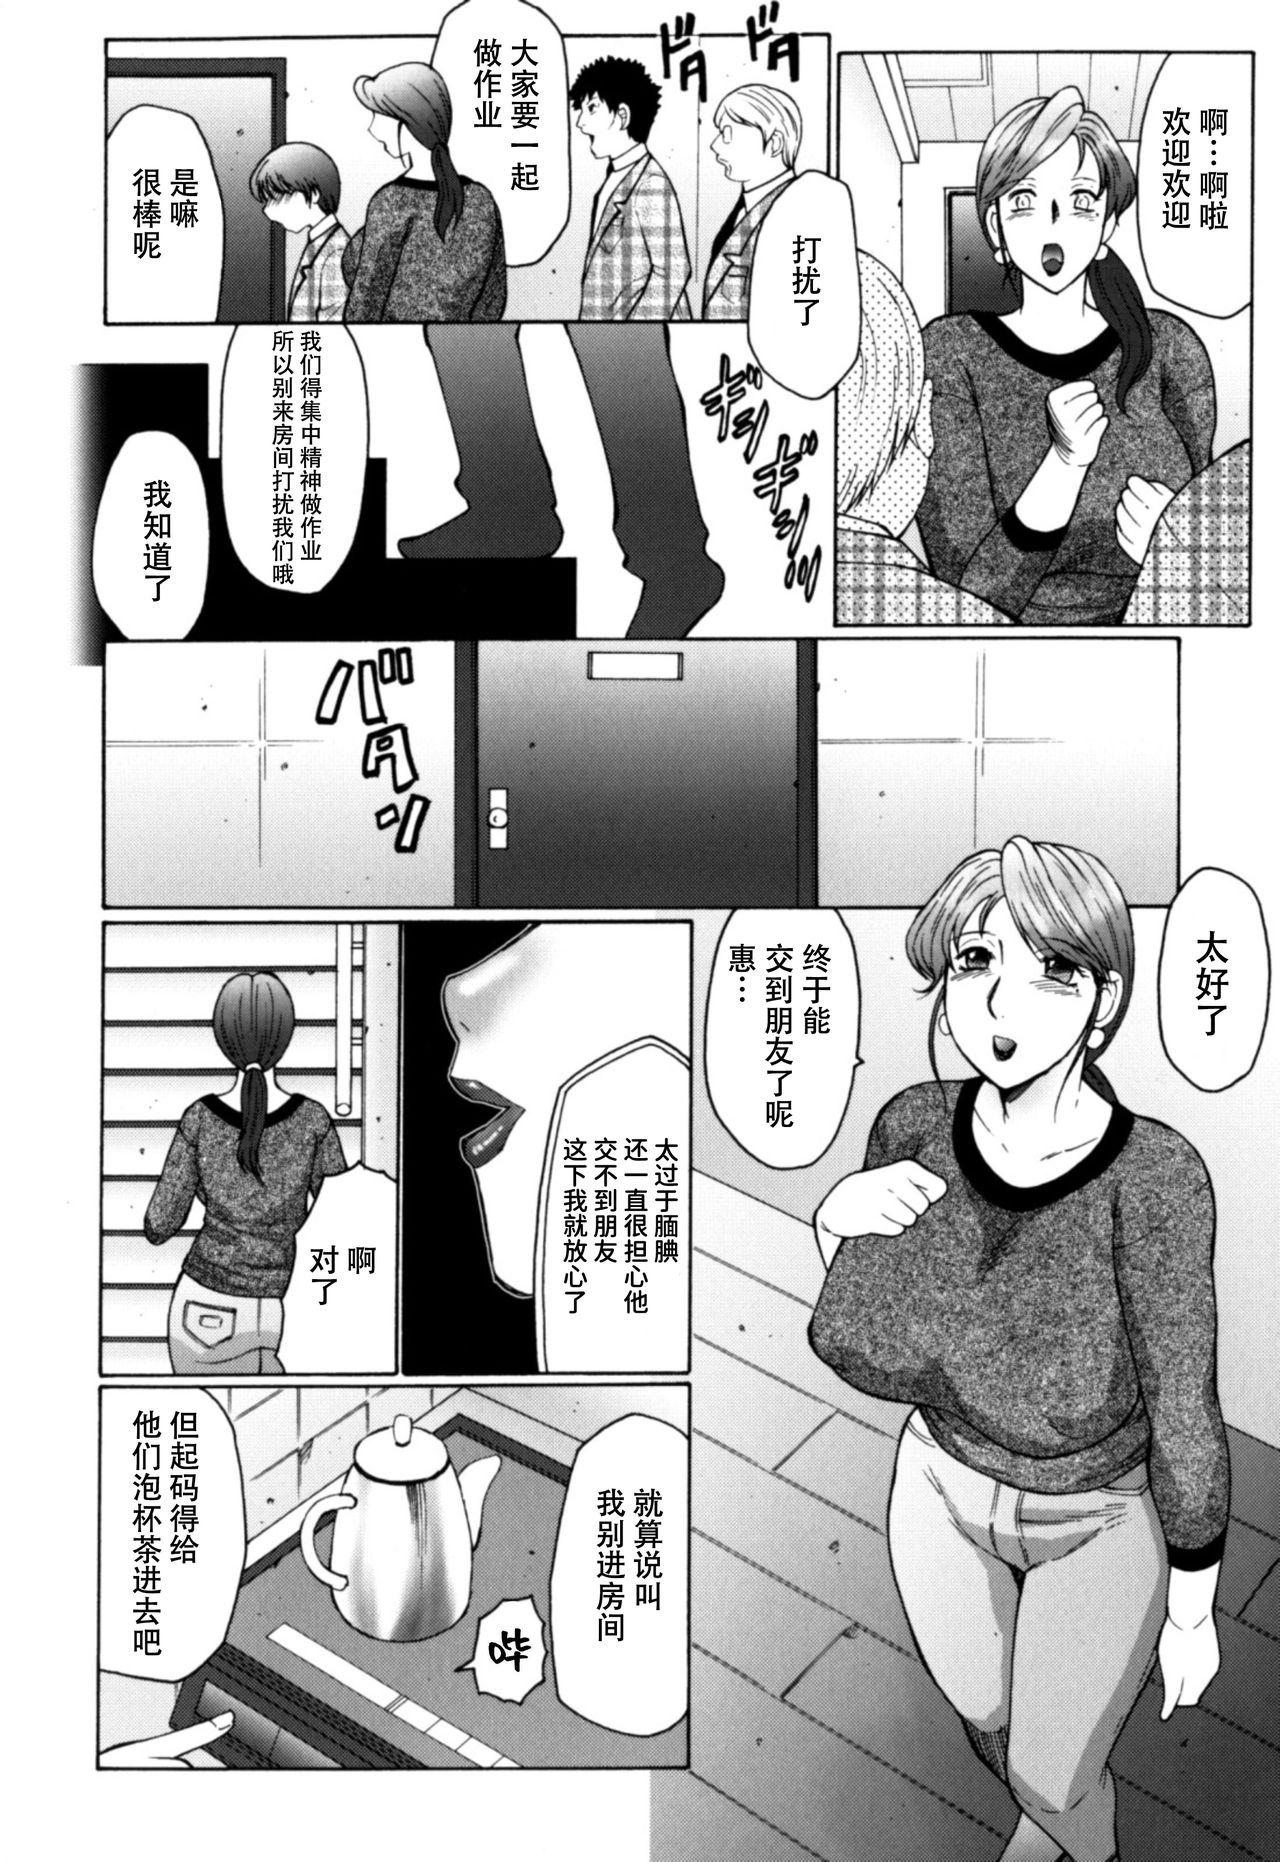 Couple Sex [Fuusen Club] Haha Mamire Ch. 1 [Chinese]【不可视汉化】 Sissy - Page 5